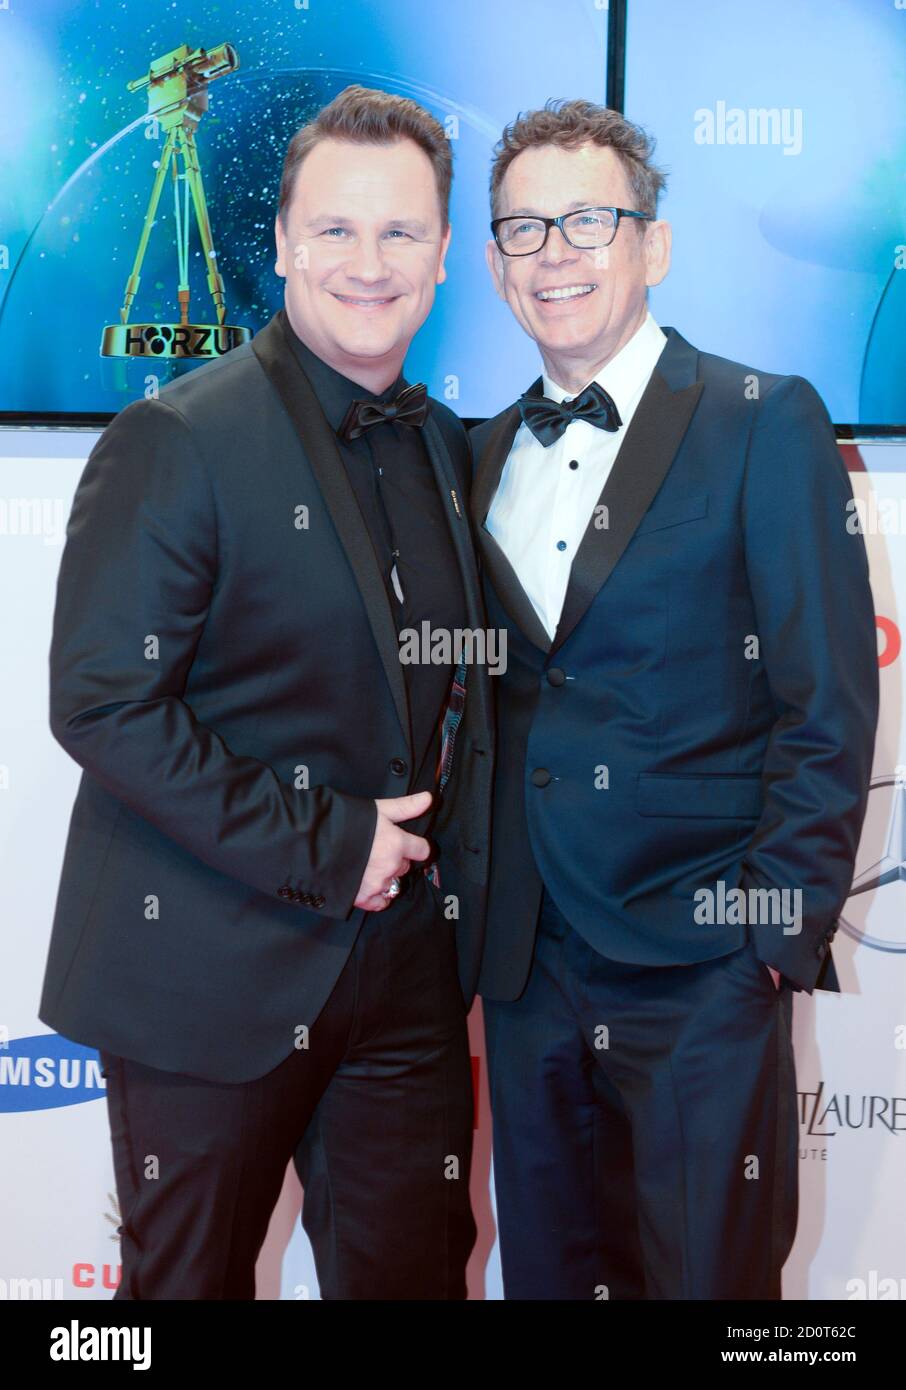 German fashion designer Guido Maria Kretschmer (L) and his husband Frank Mutters pose on the red carpet for the 'Die Goldene Kamera' (Golden Camera) awards ceremony in Hamburg, February 27, 2015. The Golden Cameras are awarded by a popular German TV magazine honouring excellence in the areas of television, film and entertainment.    REUTERS/Fabian Bimmer (GERMANY  - Tags: ENTERTAINMENT) Stock Photo